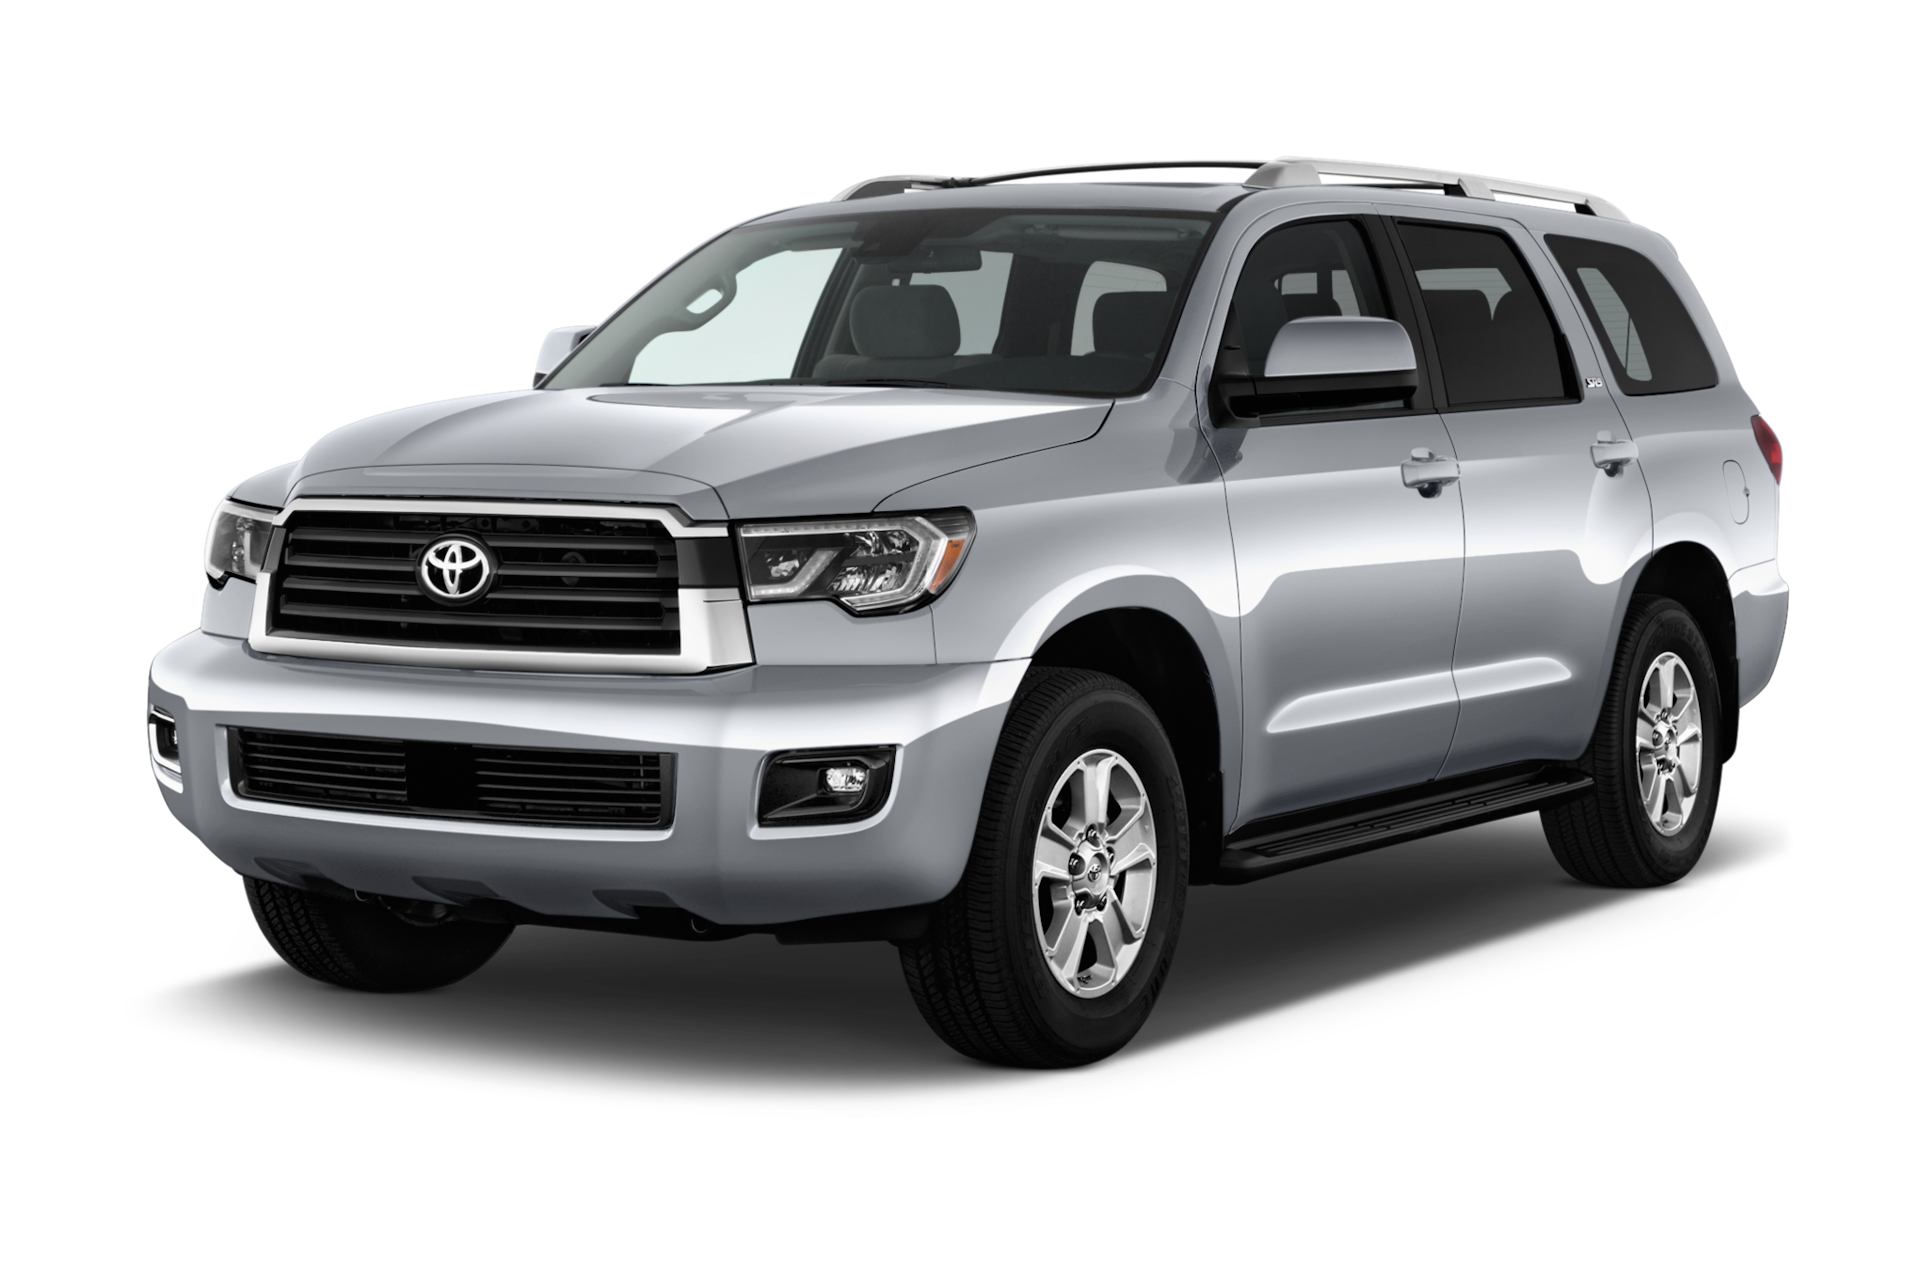 2019 Toyota Sequoia Prices, Reviews, and Photos - MotorTrend